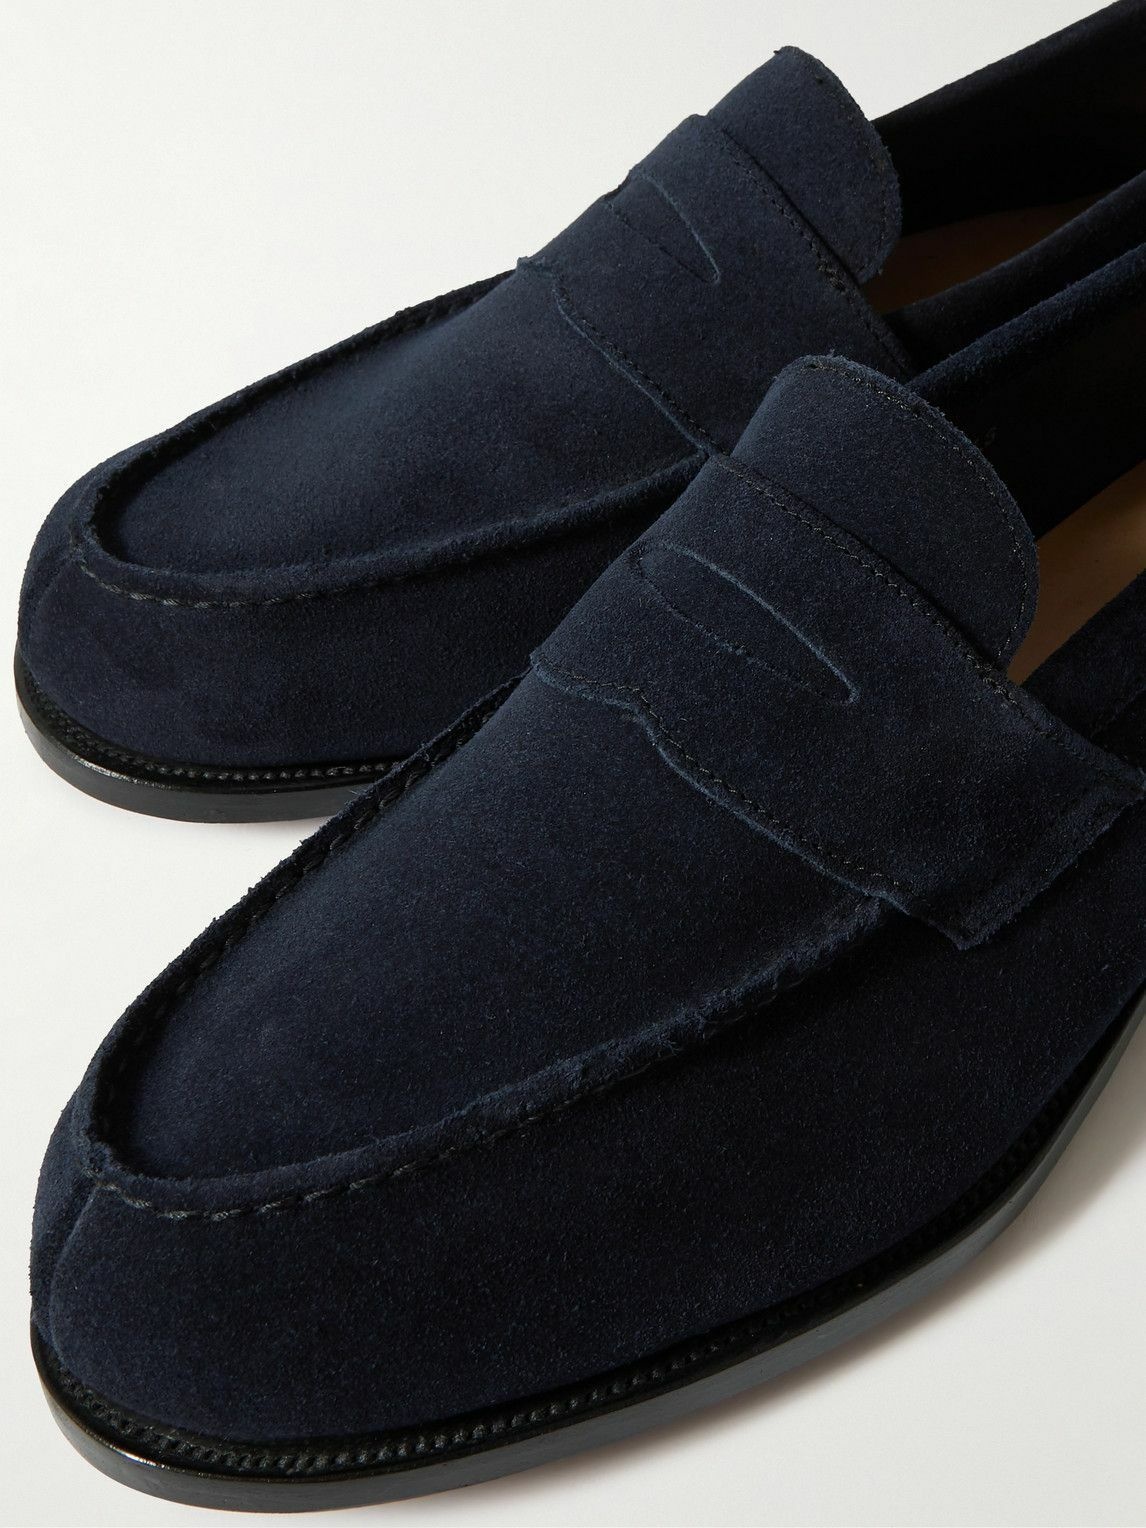 George Cleverley - Cannes Suede Penny Loafers - Blue George Cleverley